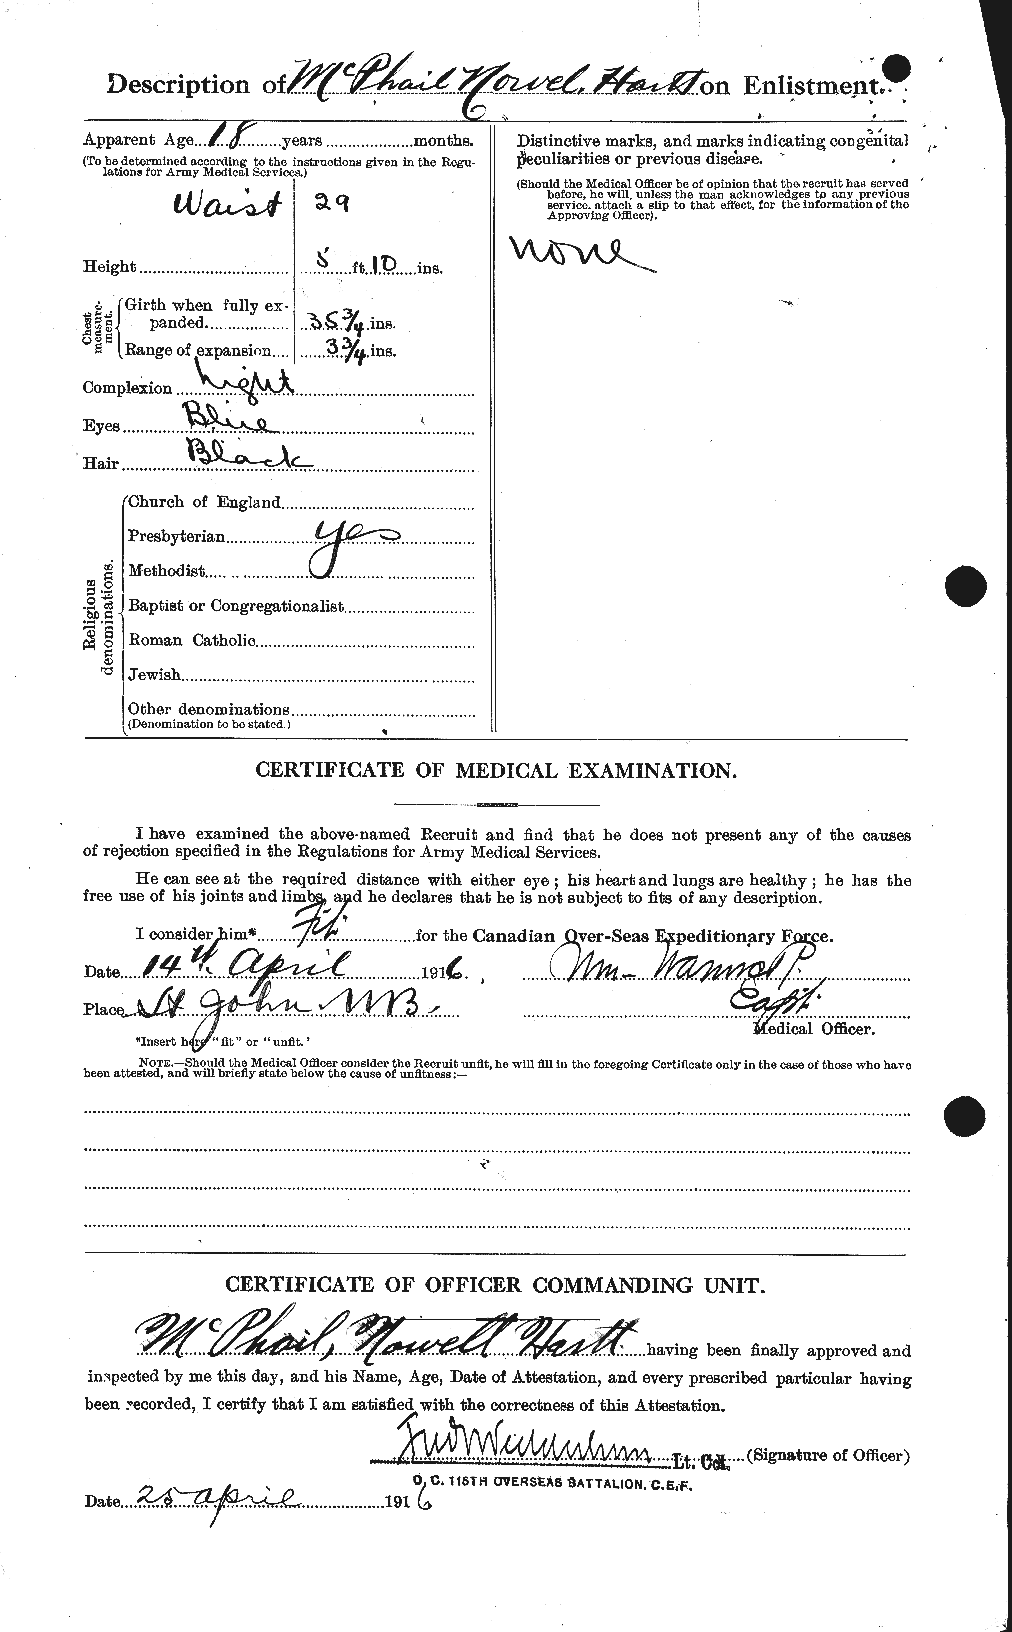 Personnel Records of the First World War - CEF 540906b